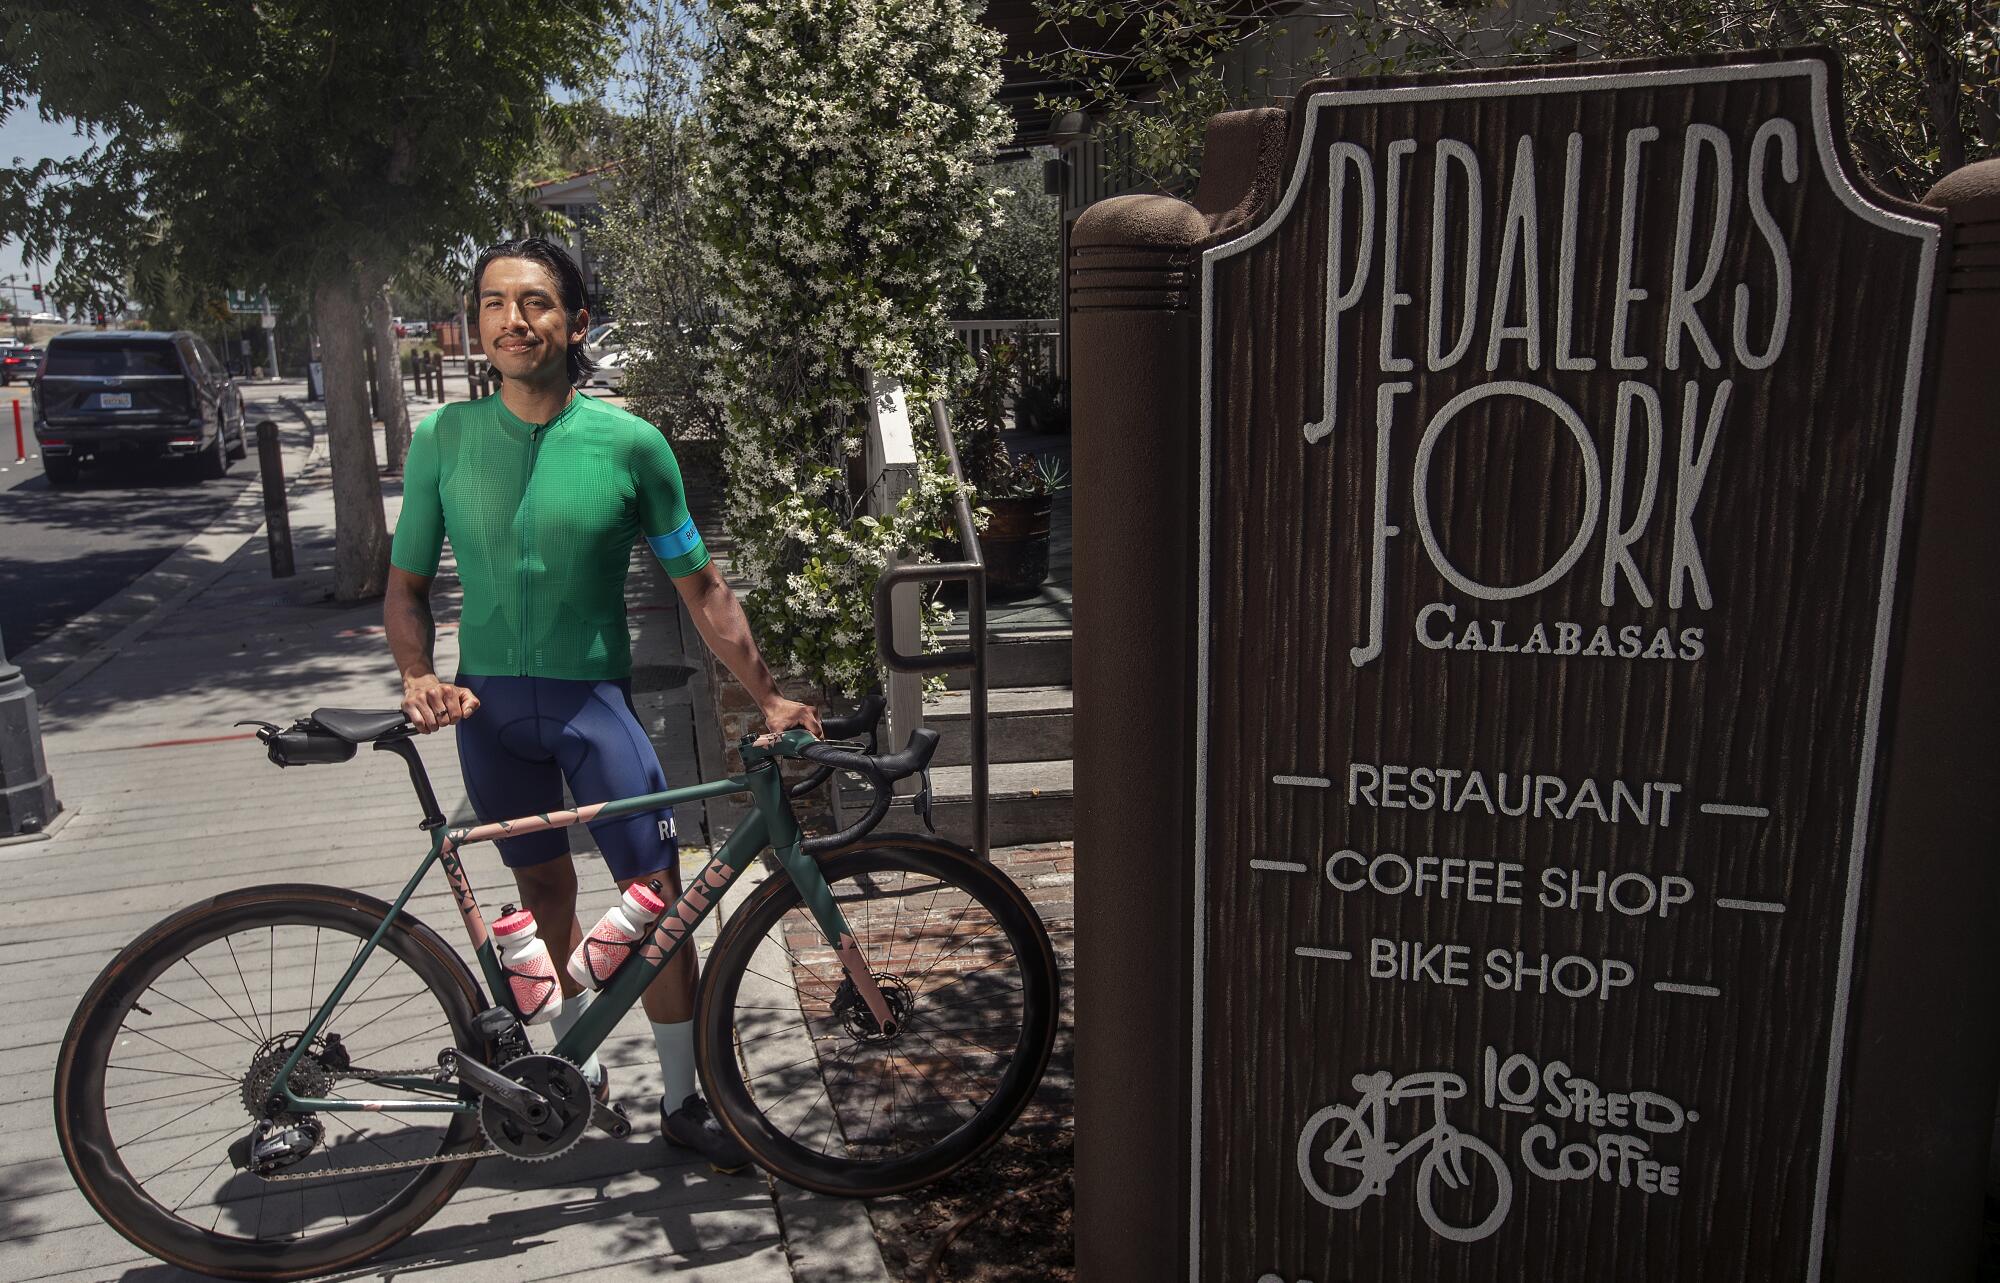 A man stands with a bicycle in front of a restaurant sign that reads "Pedalers Fork."